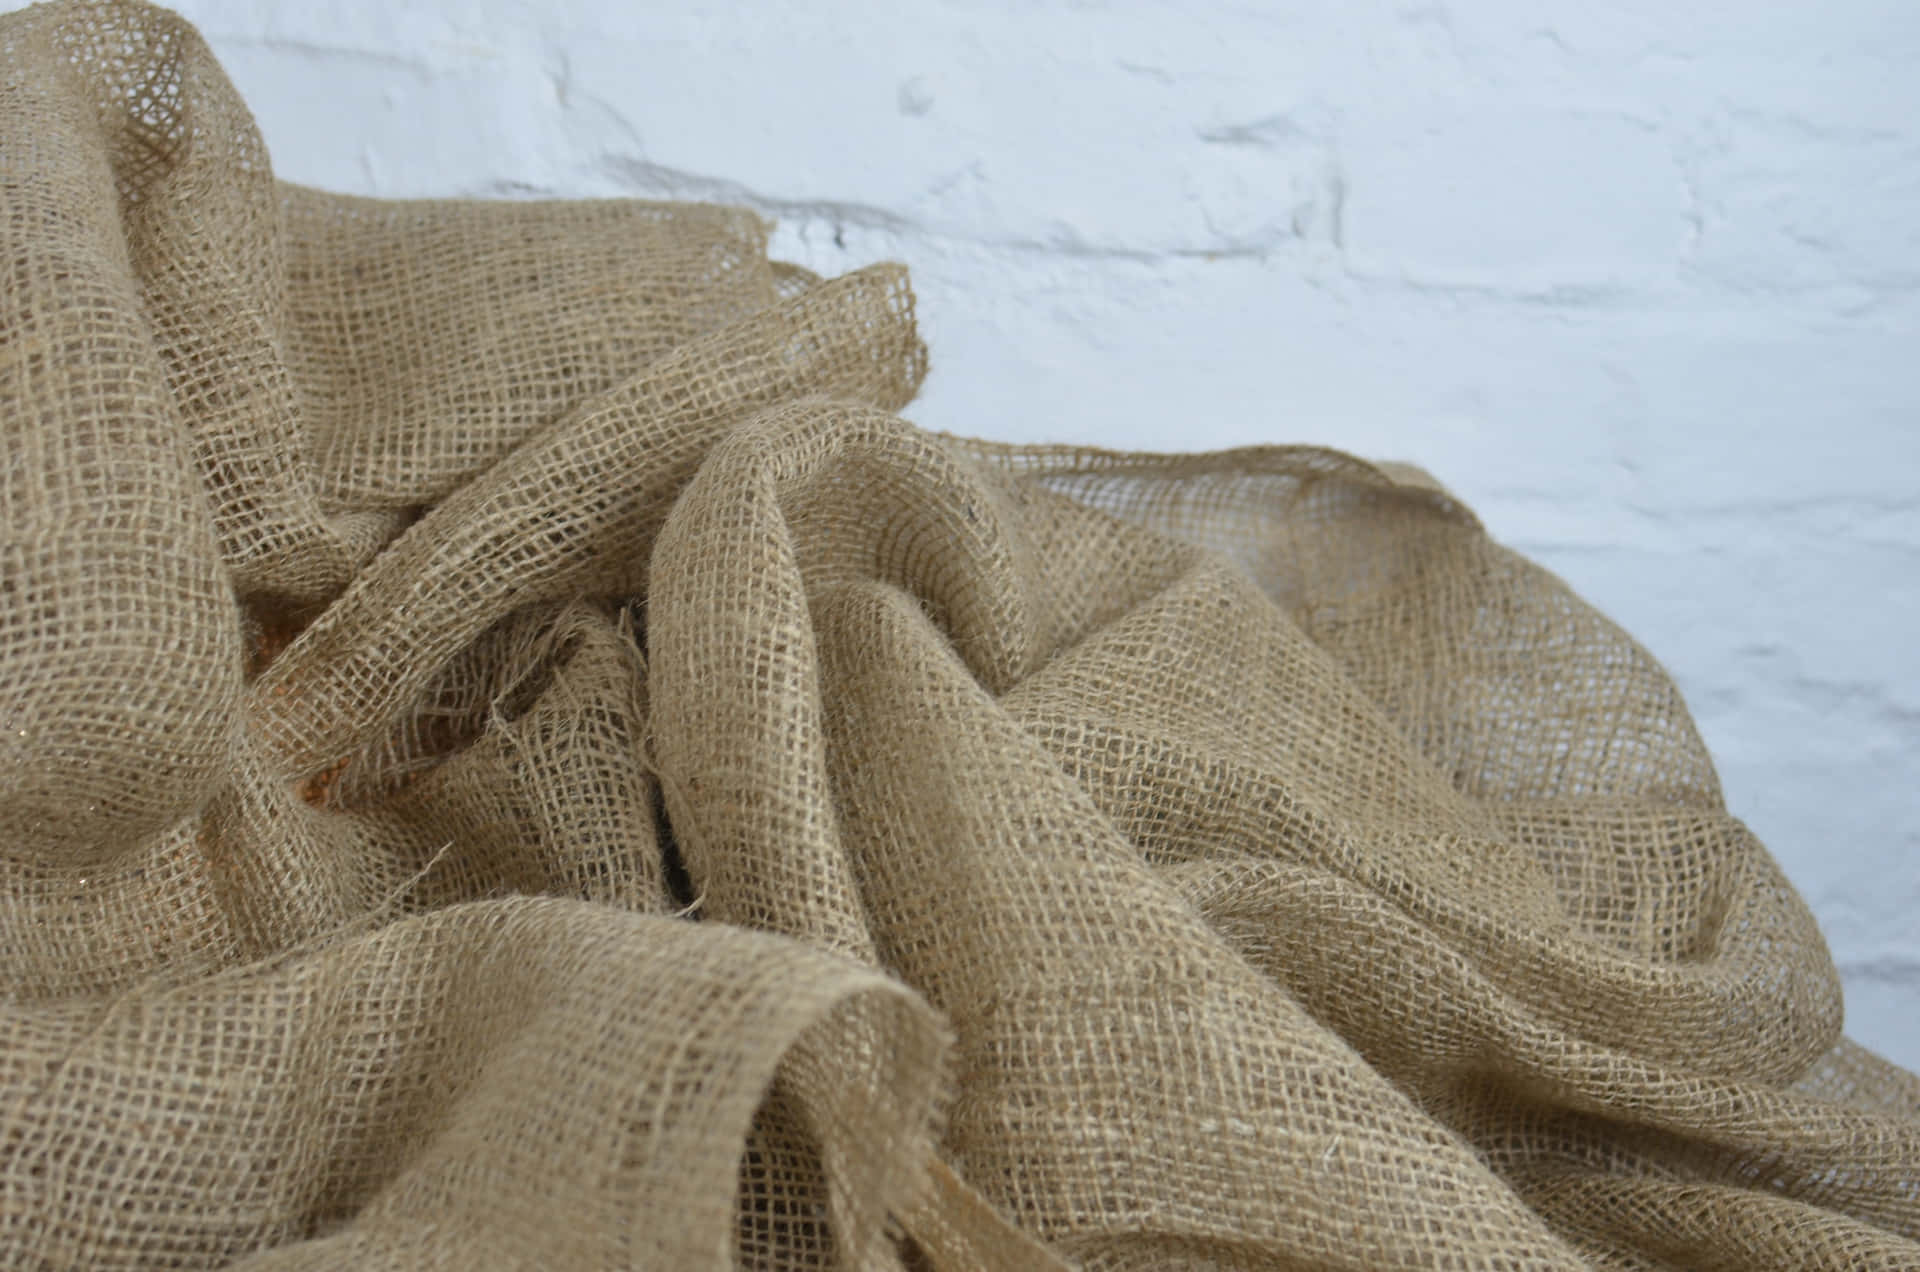 Textured burlap canvas with a rustic and natural feel.